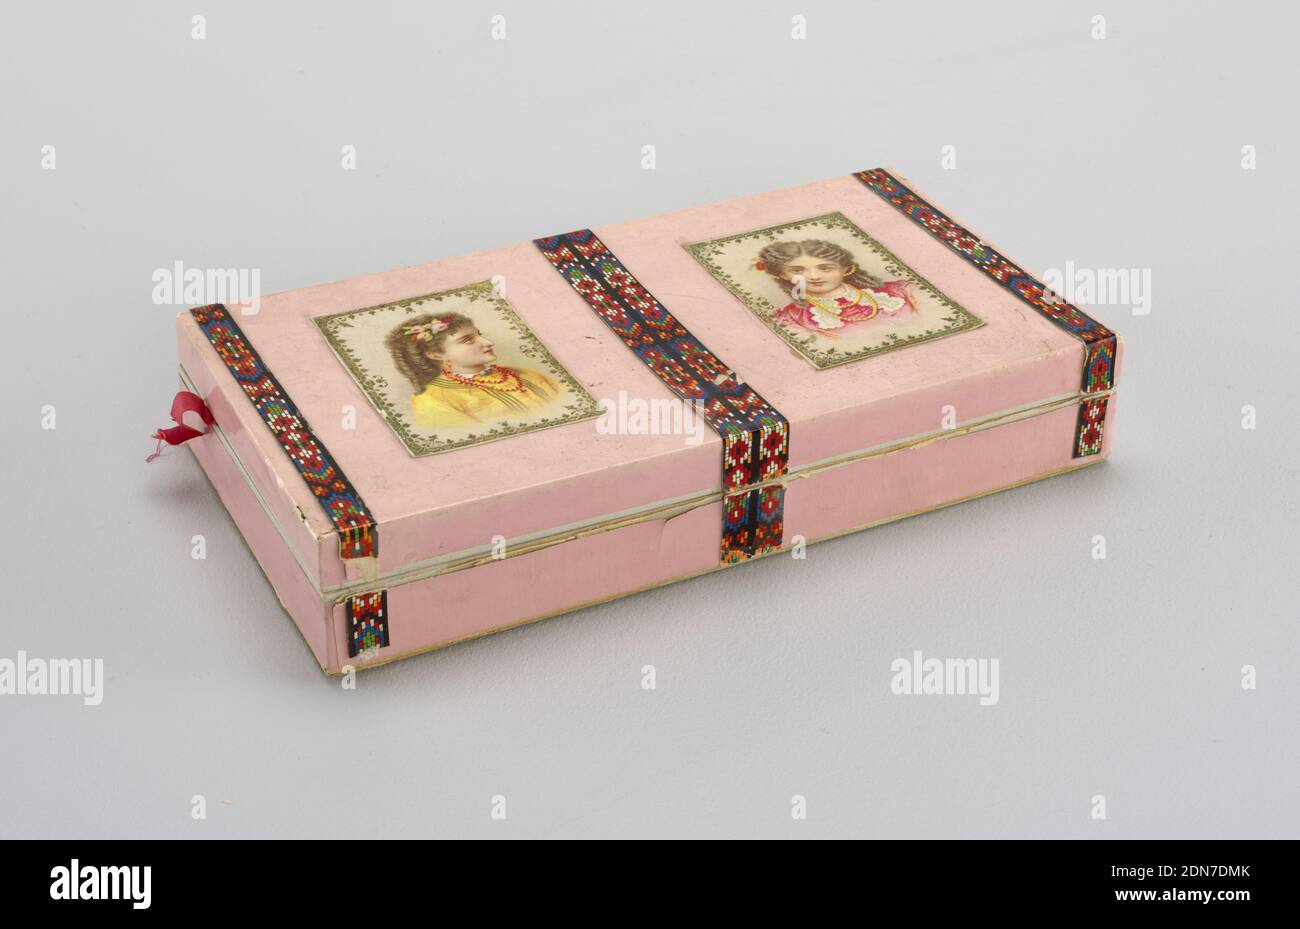 Box and cover, Cardboard and paper, Rectangular box and cover (formerly paper-hinged) covered with glossy pink paper and with strips of multicolored paper framing two colored lithograph prints of young girls on the cover. Inside edged with lace paper., USA, 1880–90, Decorative Arts, Box and cover Stock Photo